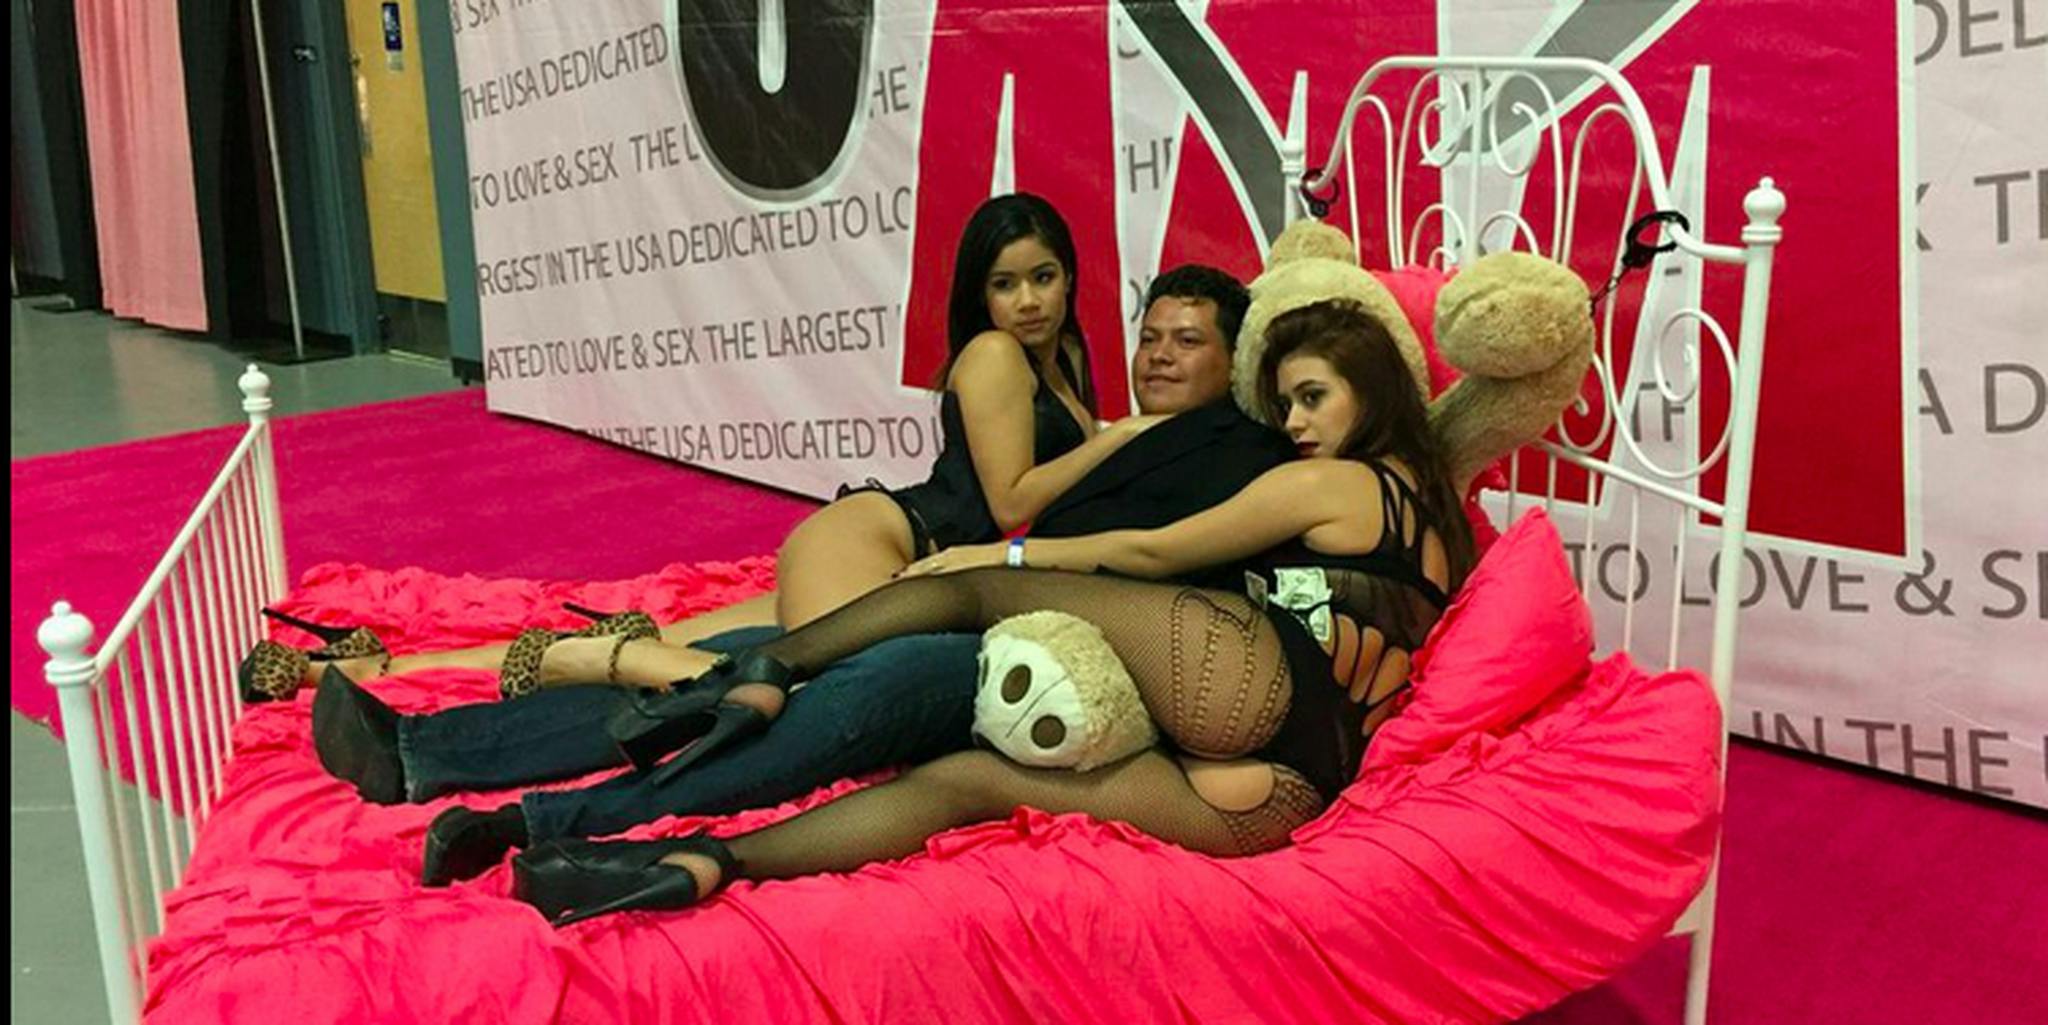 3 hours at Exxxotica, New Jersey’s largest porn convention